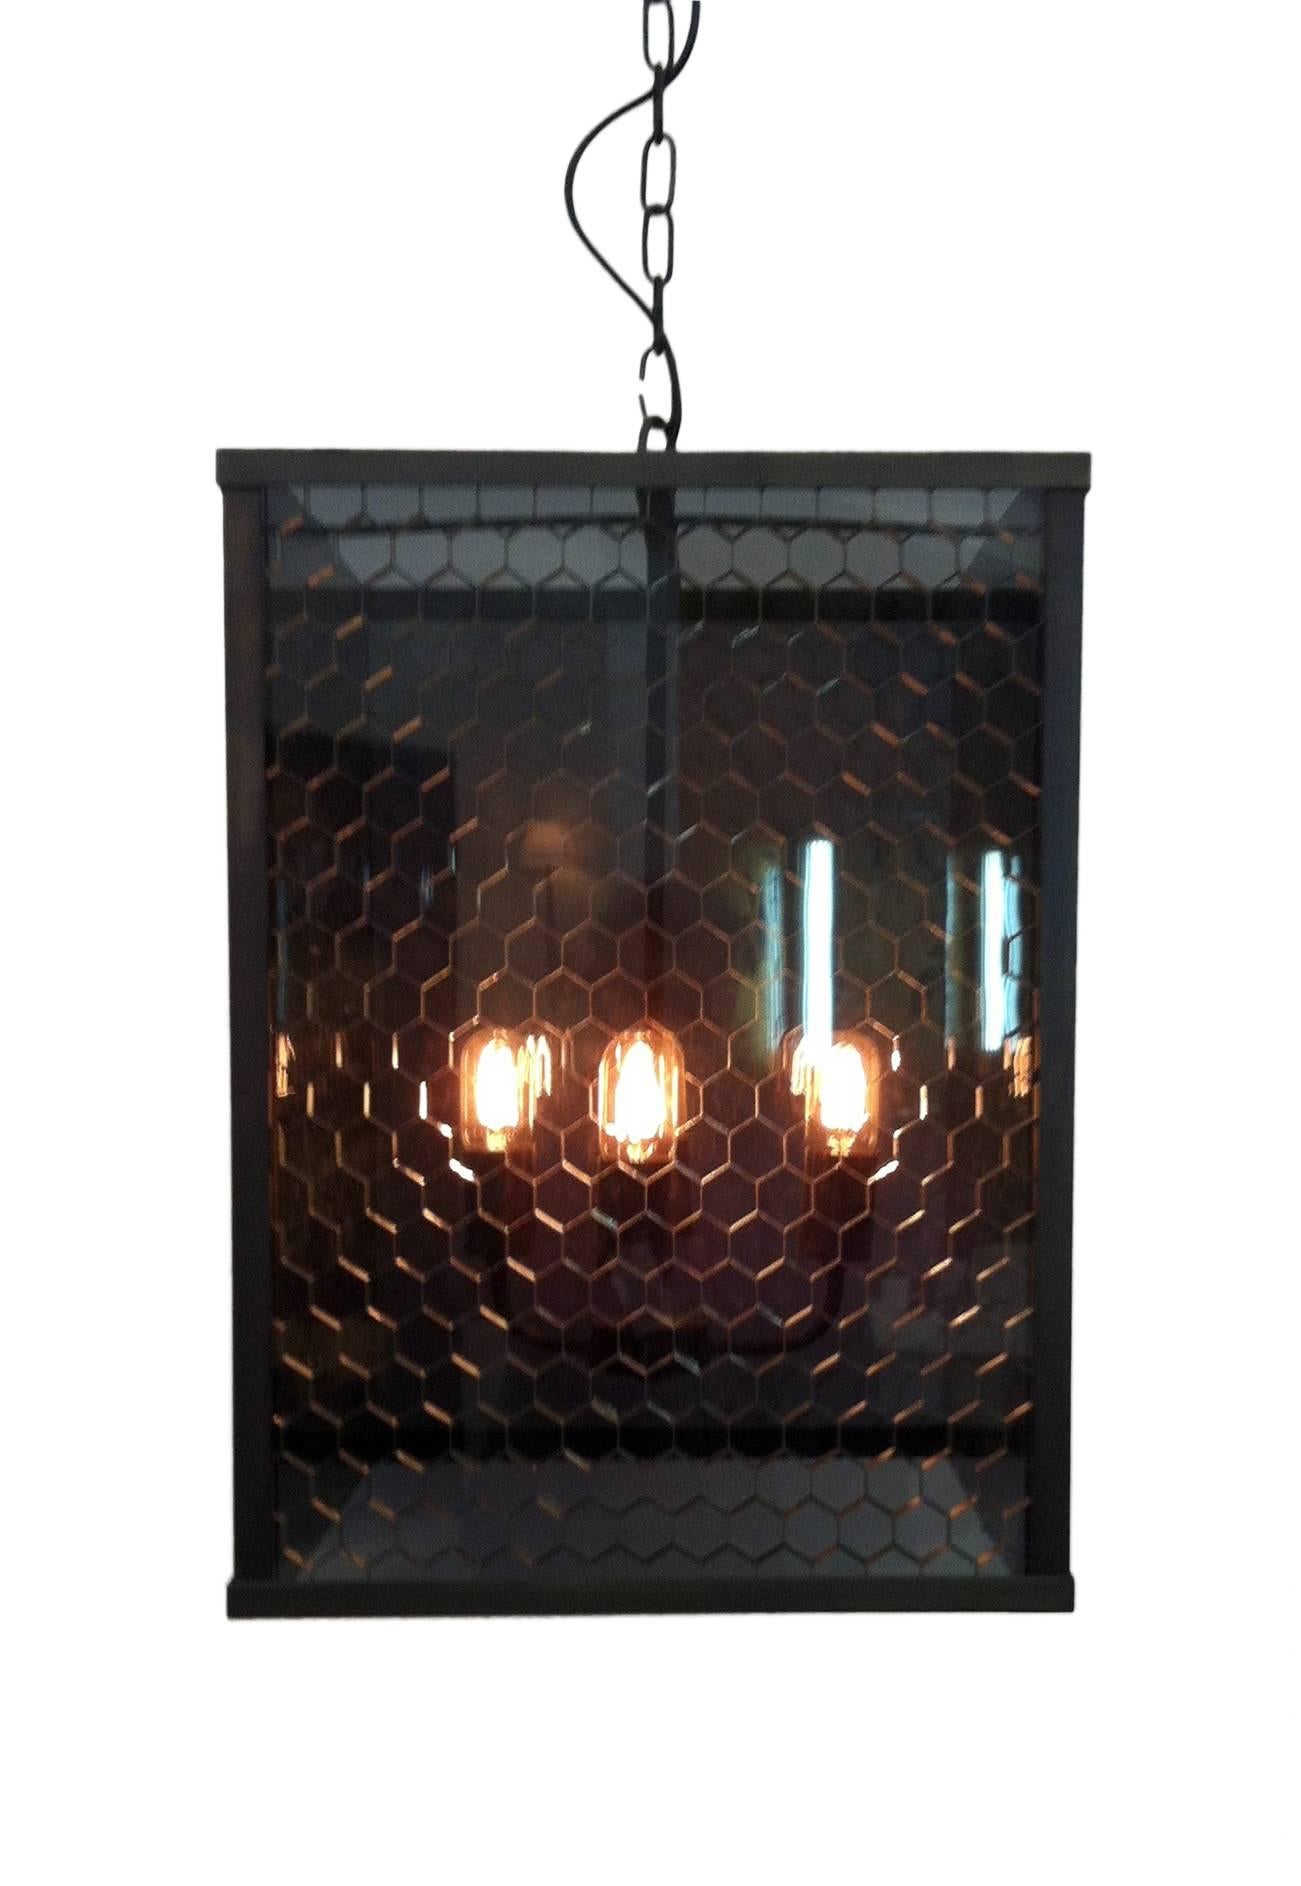 A clean, simple brass frame finished in Rustic bronze with grey-tinted rectangular honeycomb panels.
Lamp holders - 4x standard E26/27 
Made in Italy.